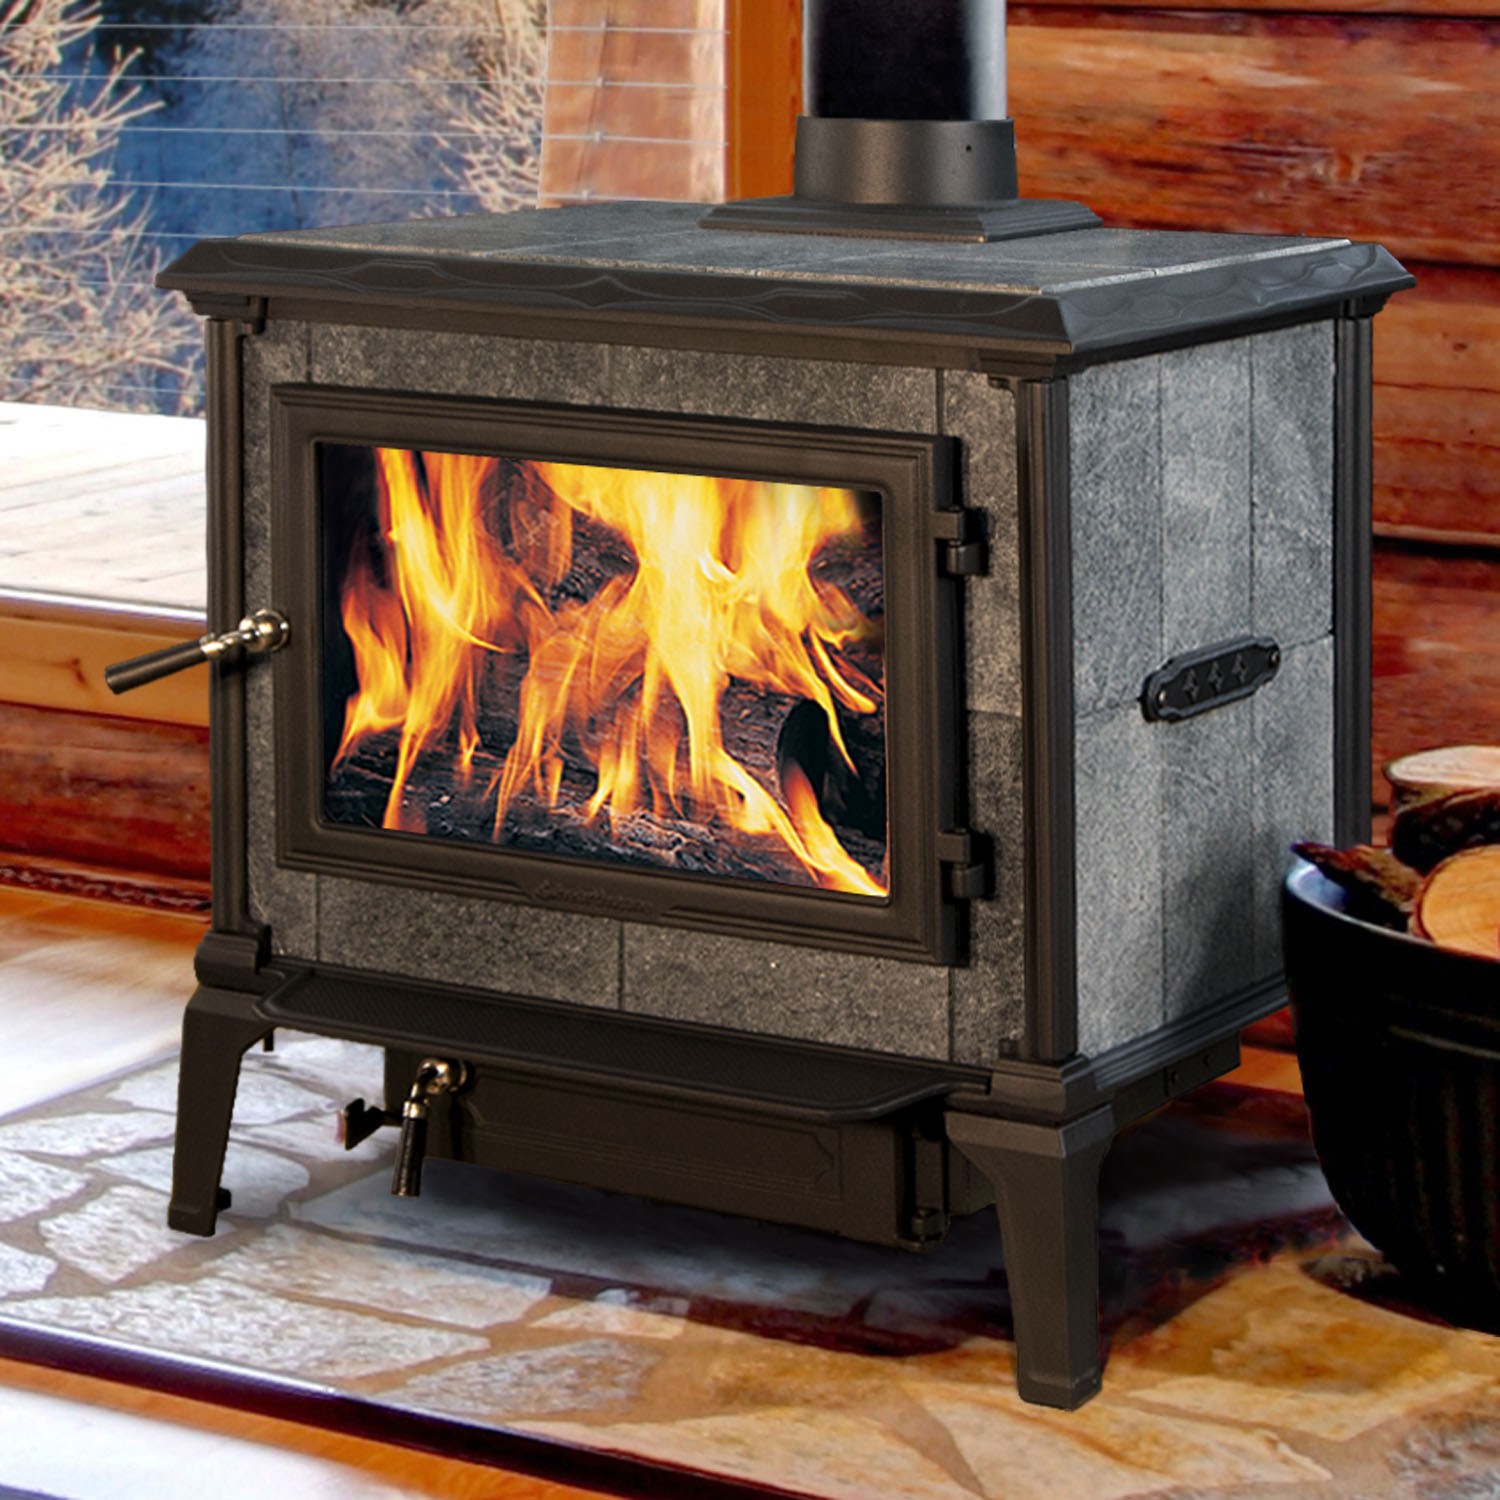 Mansfield 8012 Wood Stove black iron and granite.  Sitting on crab orchard stone with wood to the right a window to the left and wood overlapped background.